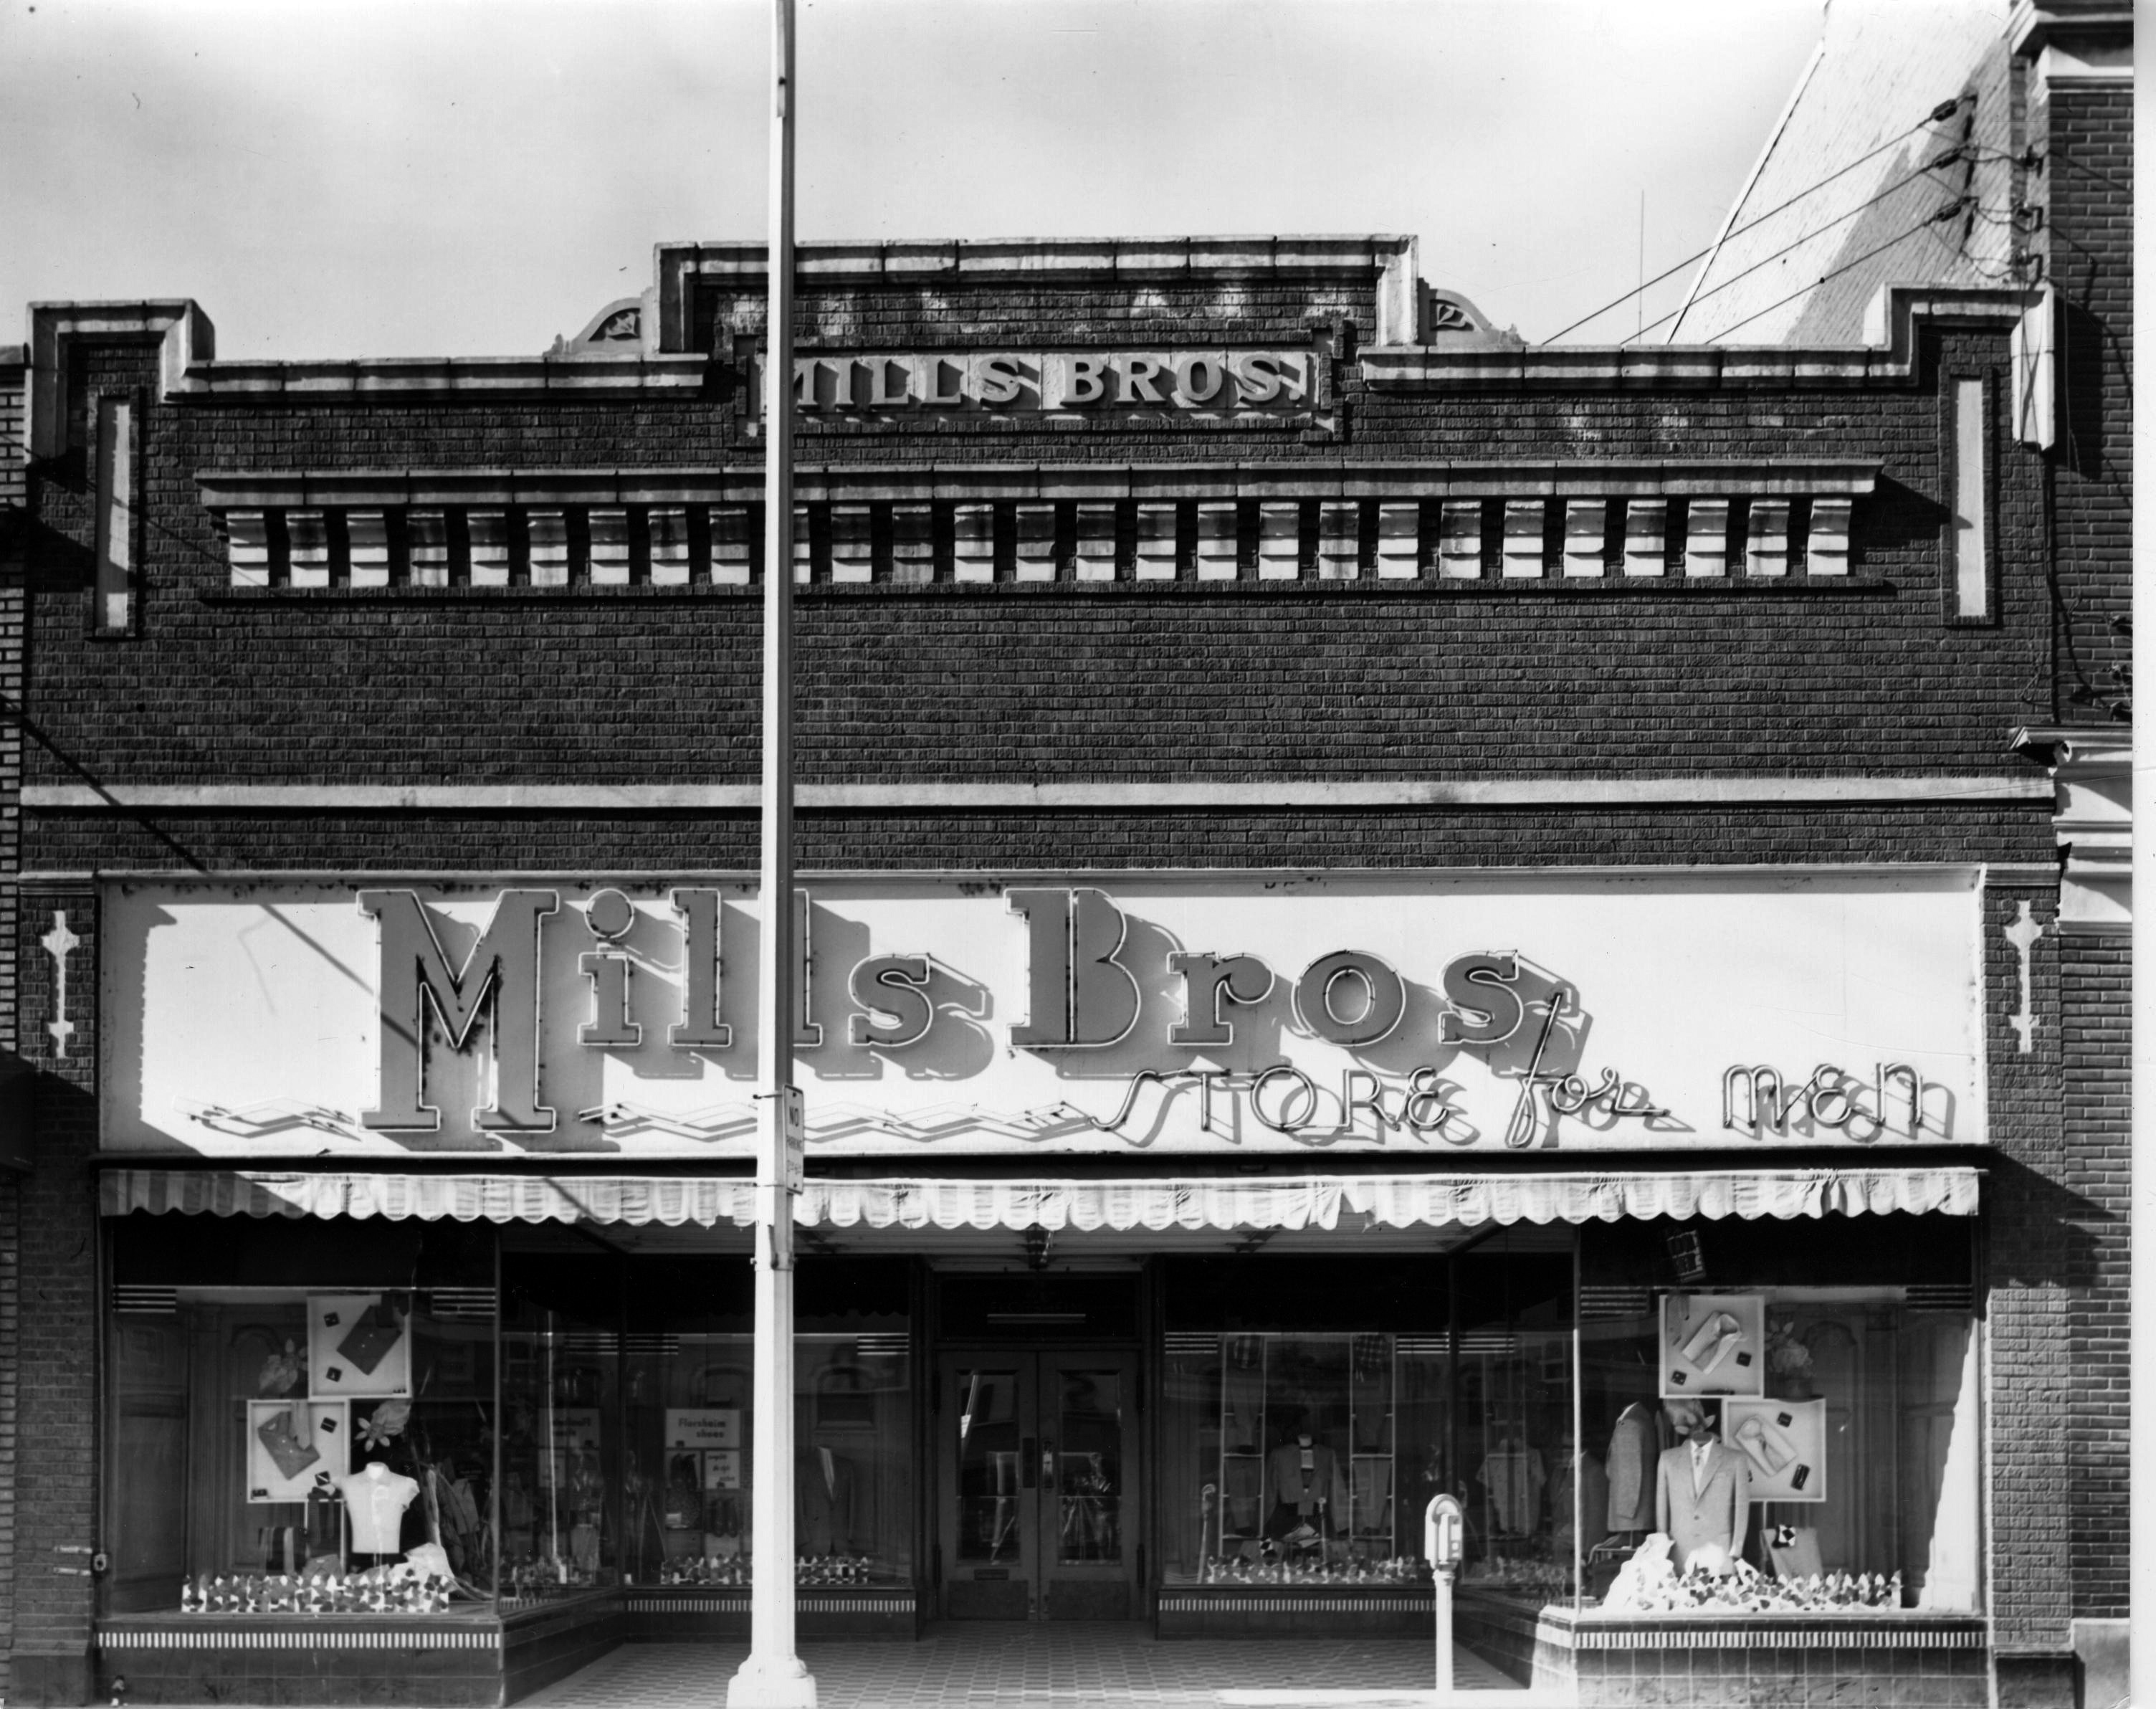 An early photograph of the Mills Brothers Storefront